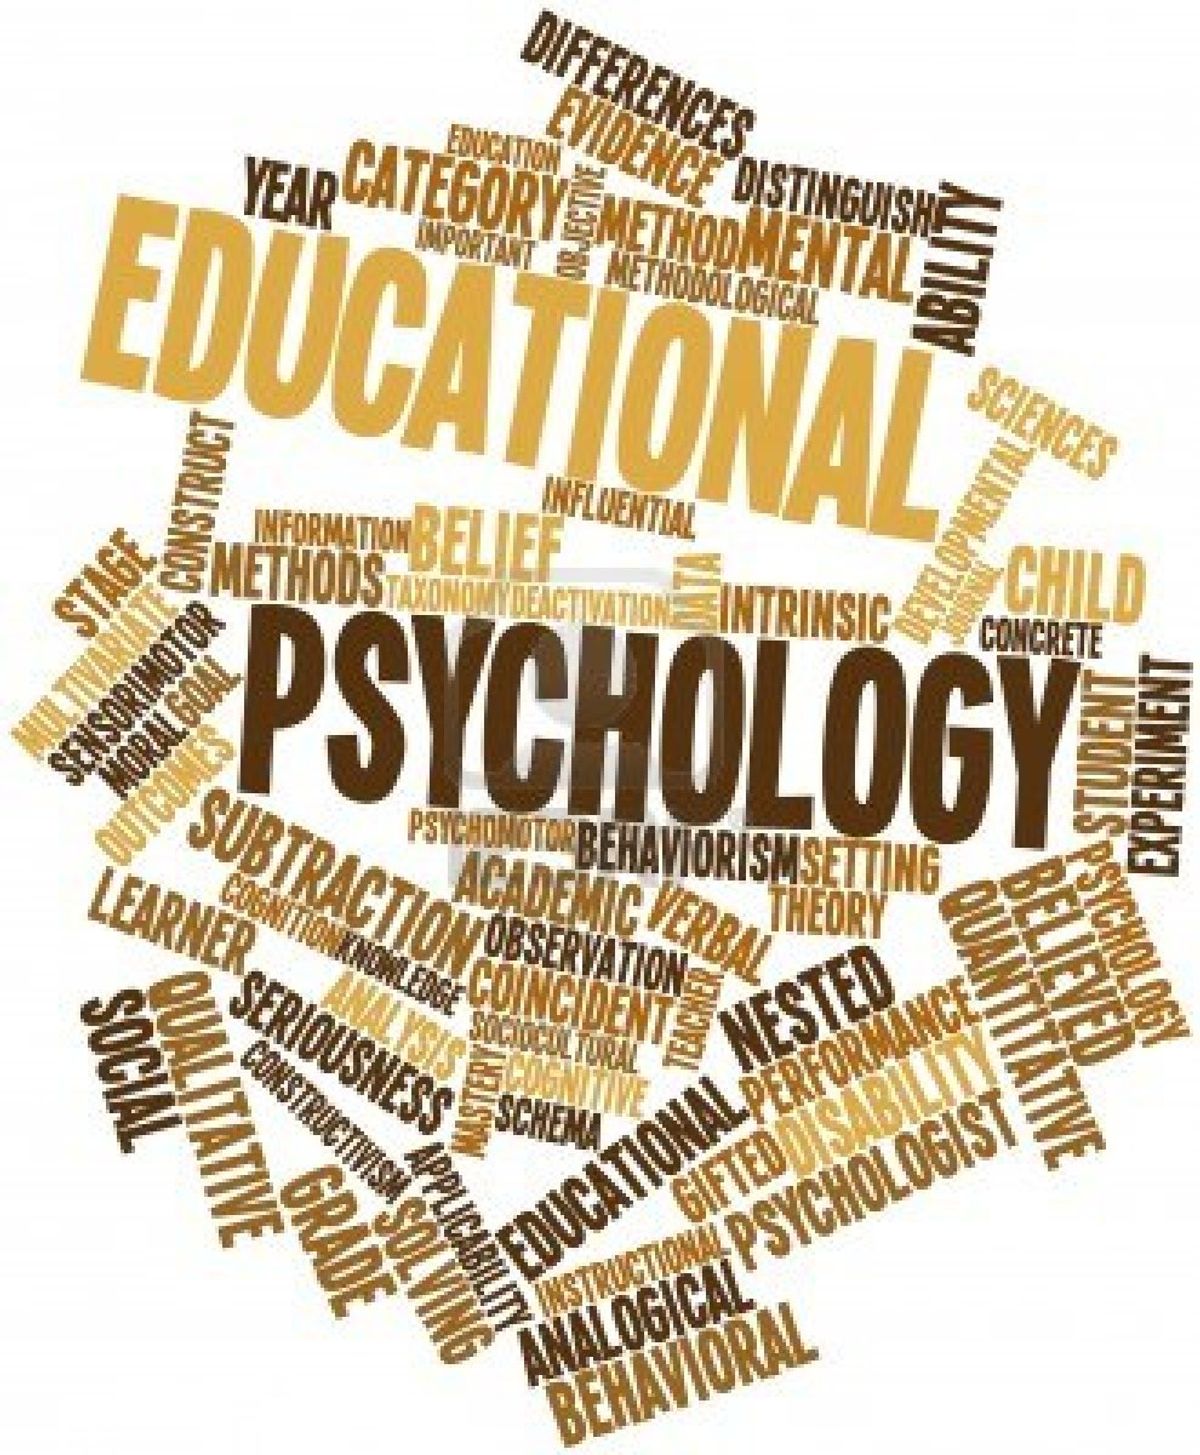 research articles on educational psychology